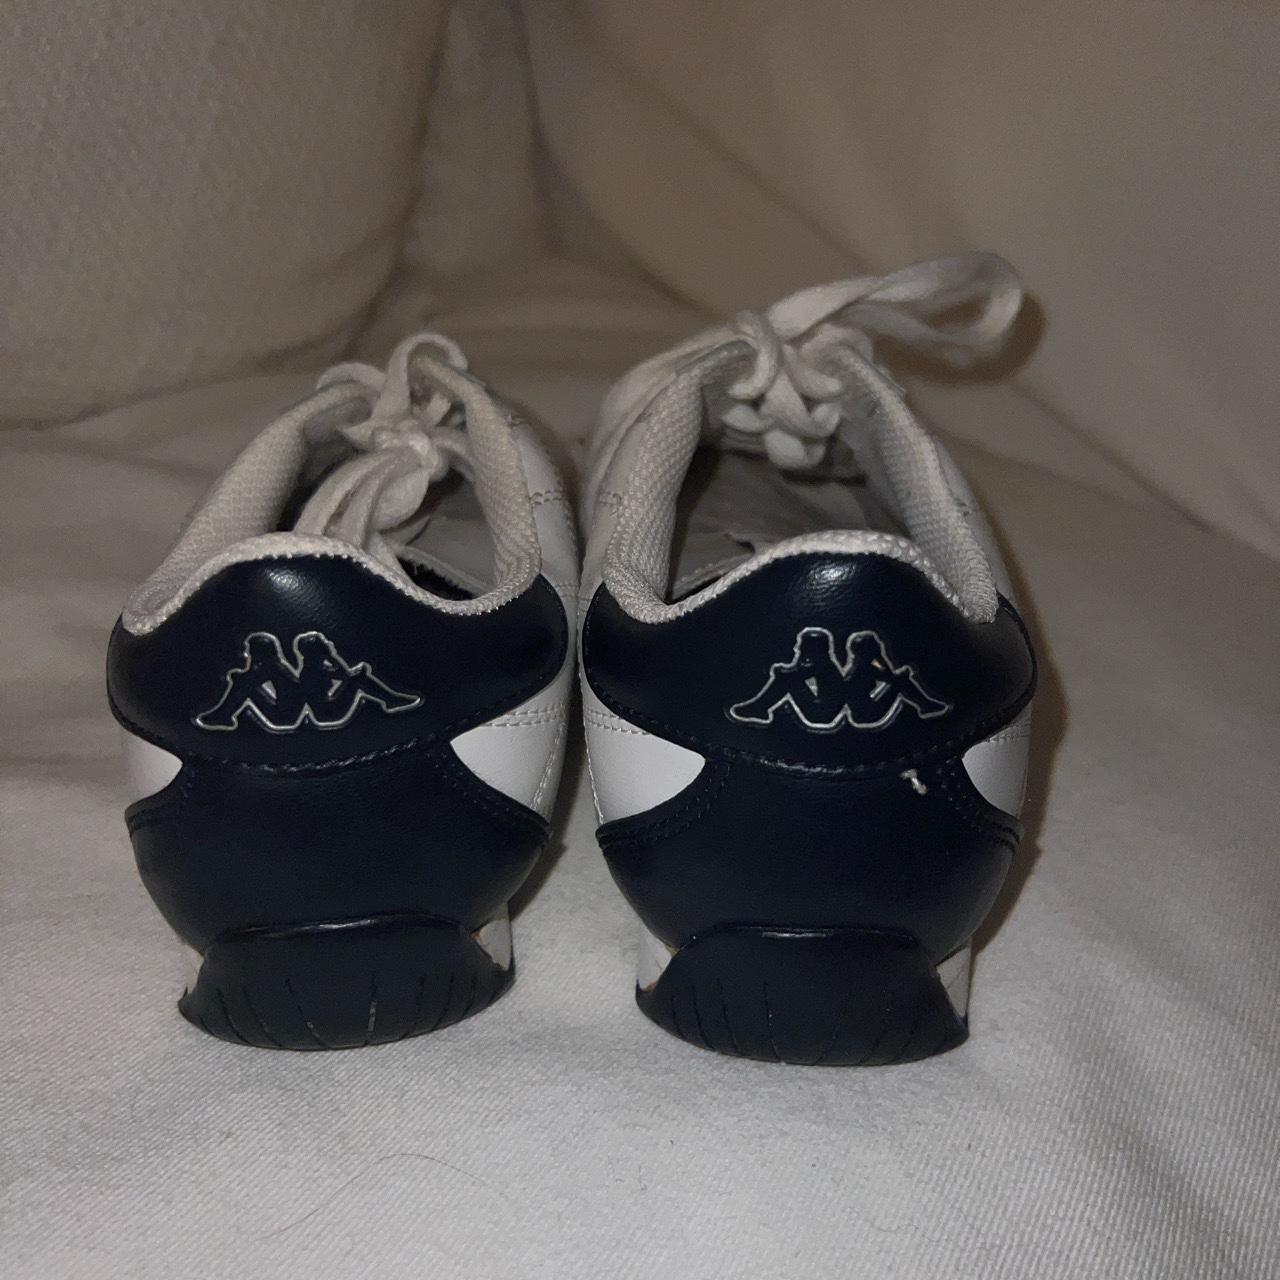 Vintage Kappa sneakers! Purchases in Slovenia. Size 39 - Depop